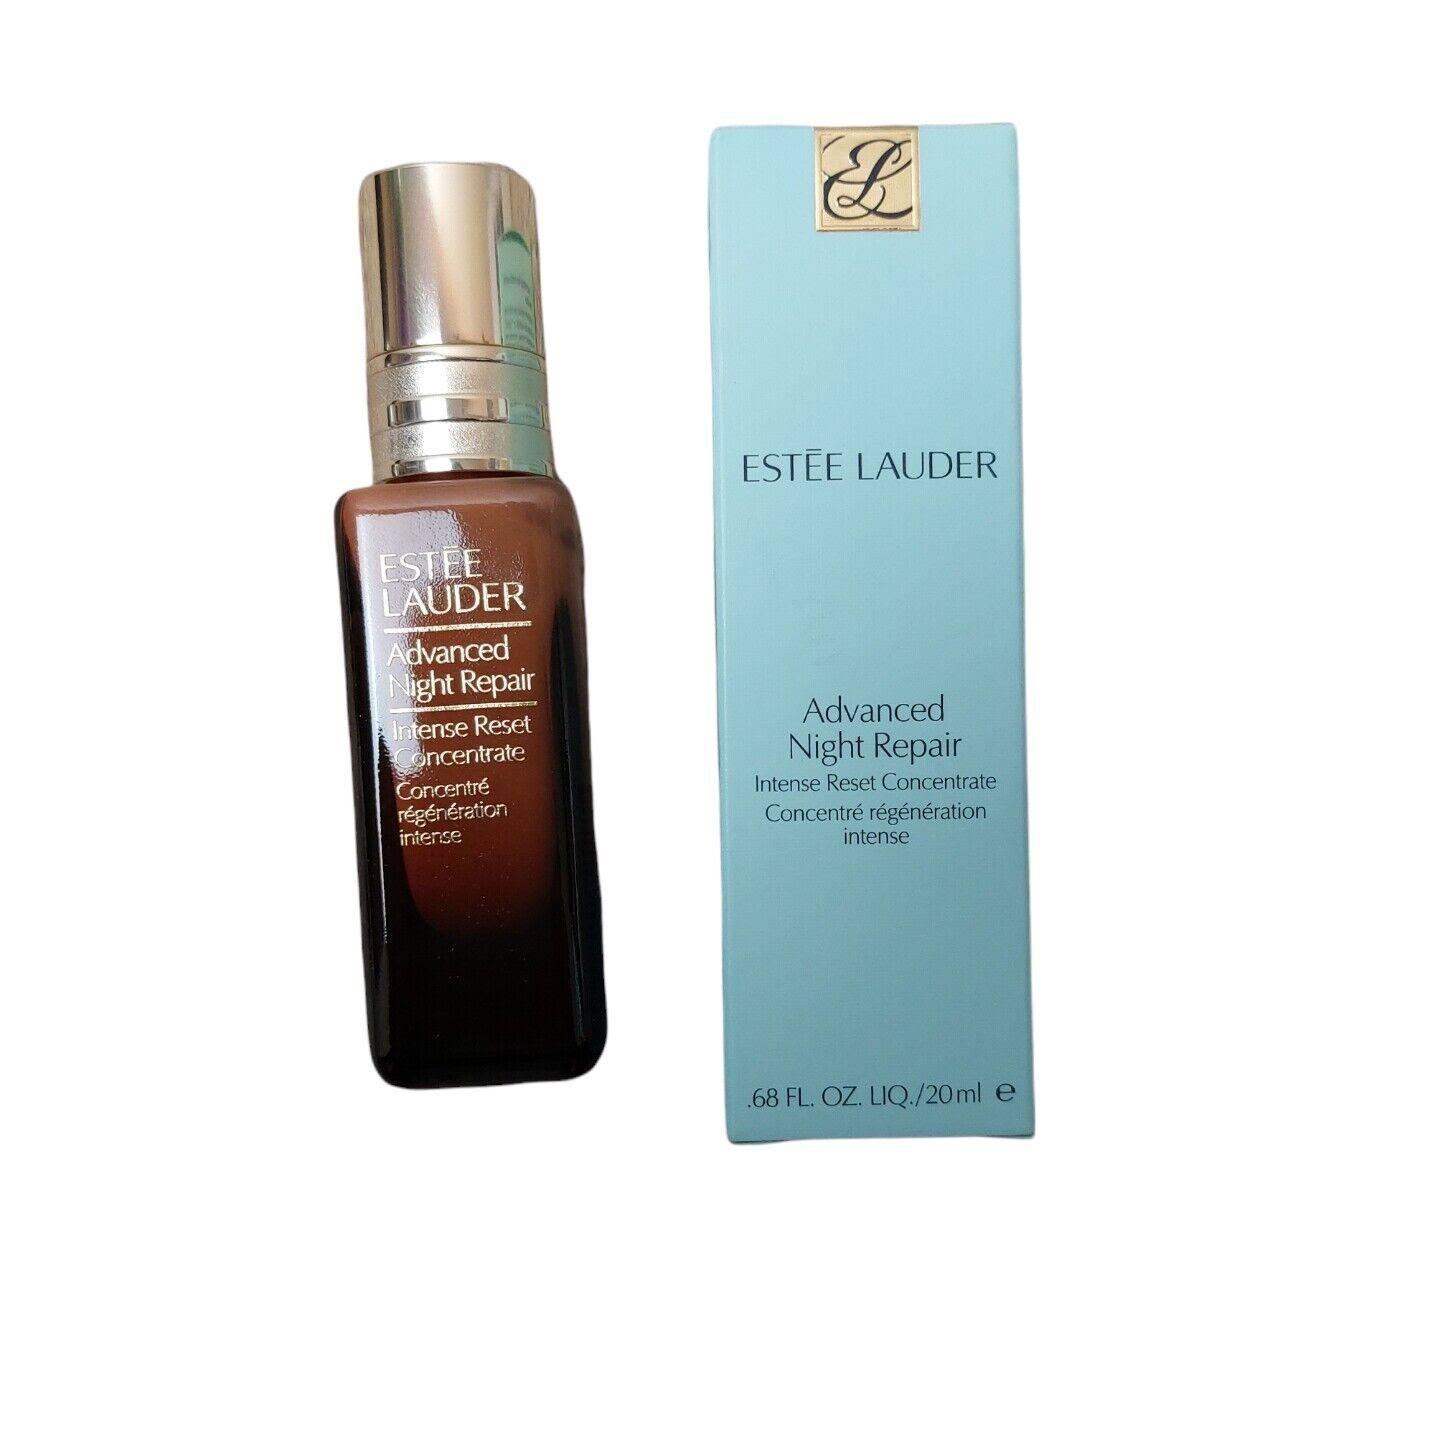 Estee Lauder Advanced Night Repair Reset Concentrate 20 ml Free Gift - Free Gift